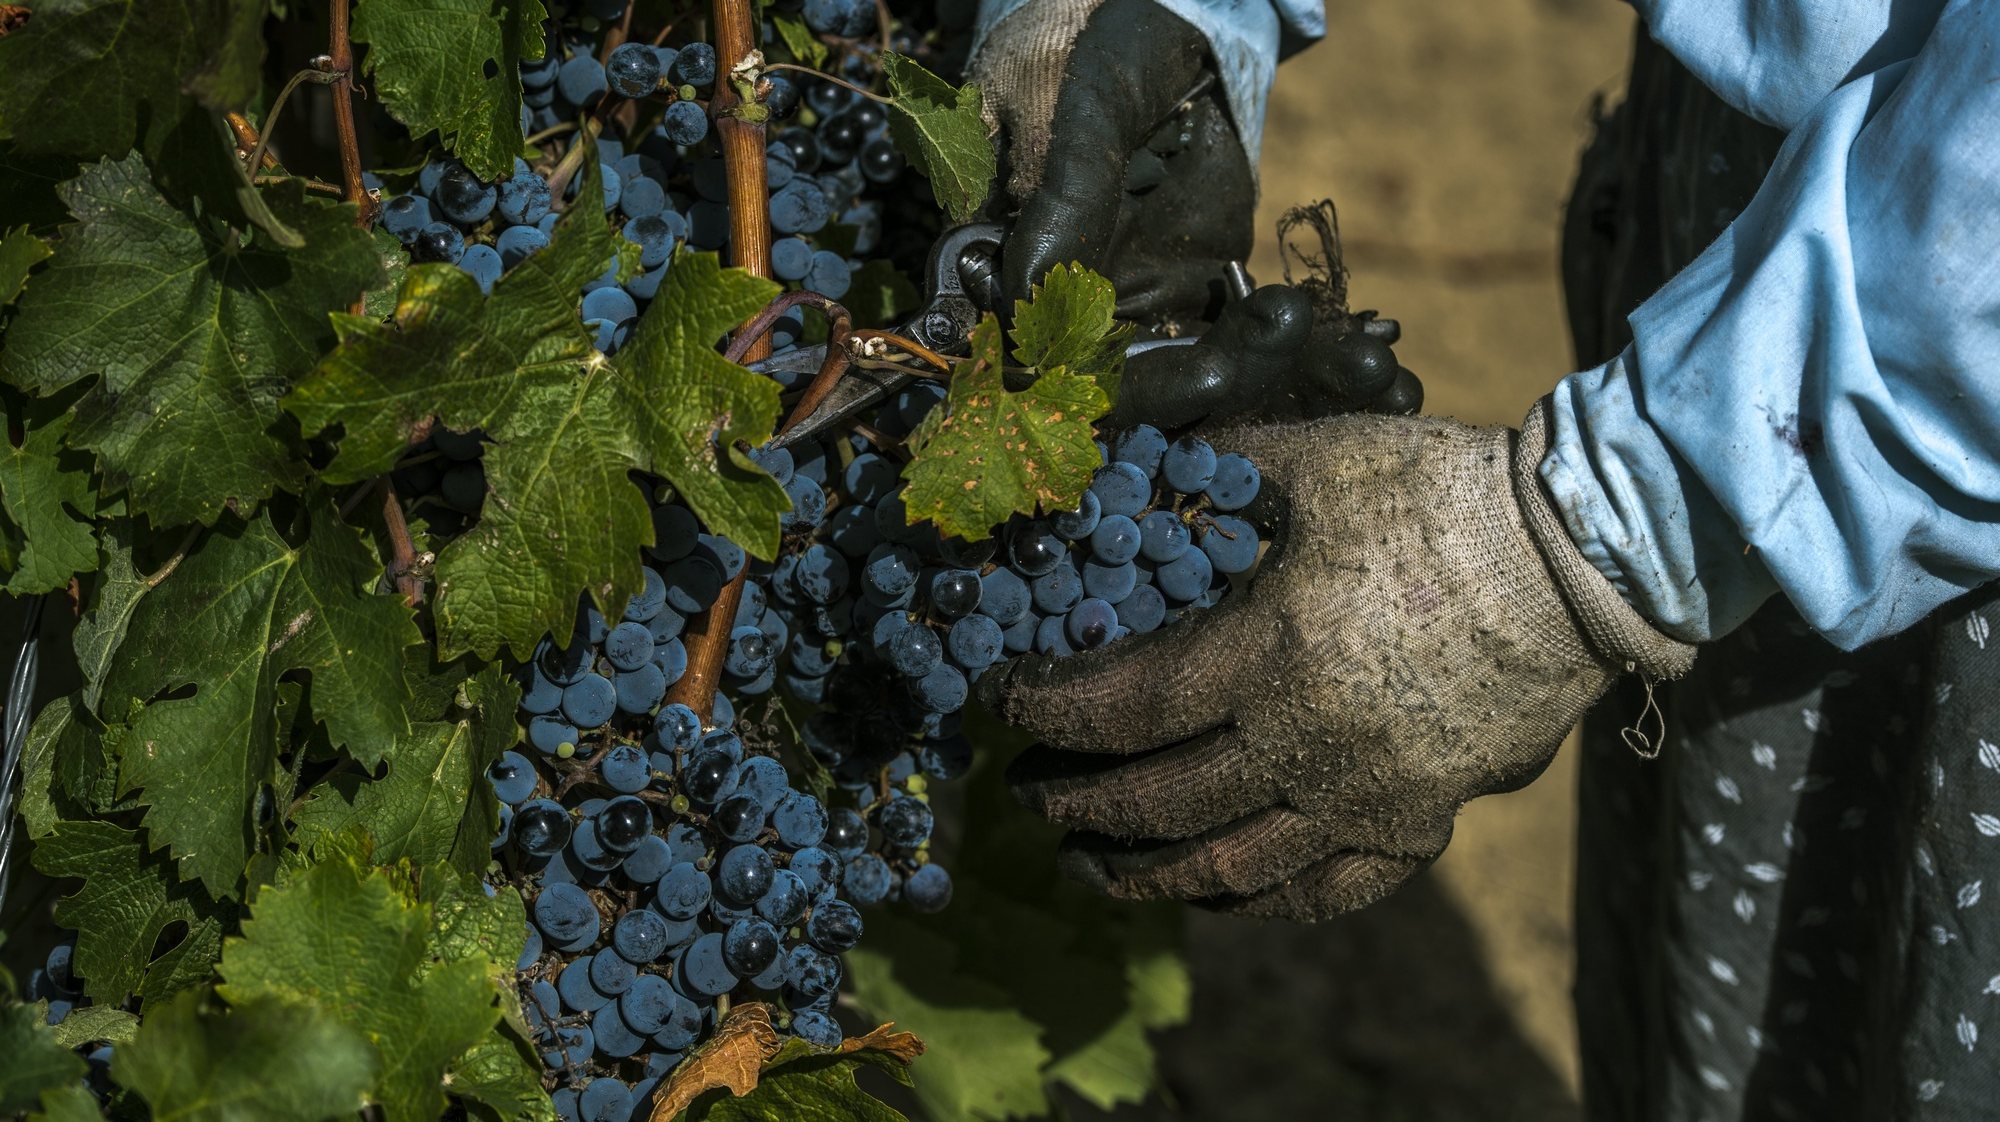 epa06207927 A worker harvests grape in the vineyards of &quot;Stobi&quot; vinery, near city of Negotino, the Former Yugoslav Republic of Macedonia, 12 September 2017. (issued 16 September) Stobi Winery is a part of the ever-evolving wine traditions in the region. The winery is located only 80 km from the capital of Skopje, in the Tikves wine region - the biggest and the most important wine region which stretches on 10.000 ha, along the same latitude as Rioja and Ribera del Duero. As the Mediterranean climate from the south collides with the continental climate from the north, it creates an area most remarkable for grape growing and wine production on the entire Balkan Peninsula. They chose to place their winery in the locality of Gradsko, in vicinity of the ancient city of Stobi, where the two rivers Erigon (Crna river) and Axios (Vardar) cross their path. It is also where they cultivate all of their vineyards.
The range of different local and international varieties that they cultivate is large: R’kaciteli, Smederevka, Temjanika, Chardonnay, Zilavka,  Zupljanka, Muscat Ottonel, Italian Riesling, Rhein Riesling (whites), Vranec, Cabernet Sauvignon, Cabernet Franc, Merlot, Pinot Noir, Petit Verdot, Syrah, Prokupec (reds). The capacity of the winery is 4.5 million liters, of which 350 000l in oak barrels and barrique. More than 25 different labels are currently produced in the Stobi Winery divided in 4 product lines. This winery is export oriented and present with their wide portfolio on over 20 different markets worldwide.  EPA/GEORGI LICOVSKI  ATTENTION: This Image is part of a PHOTO SET